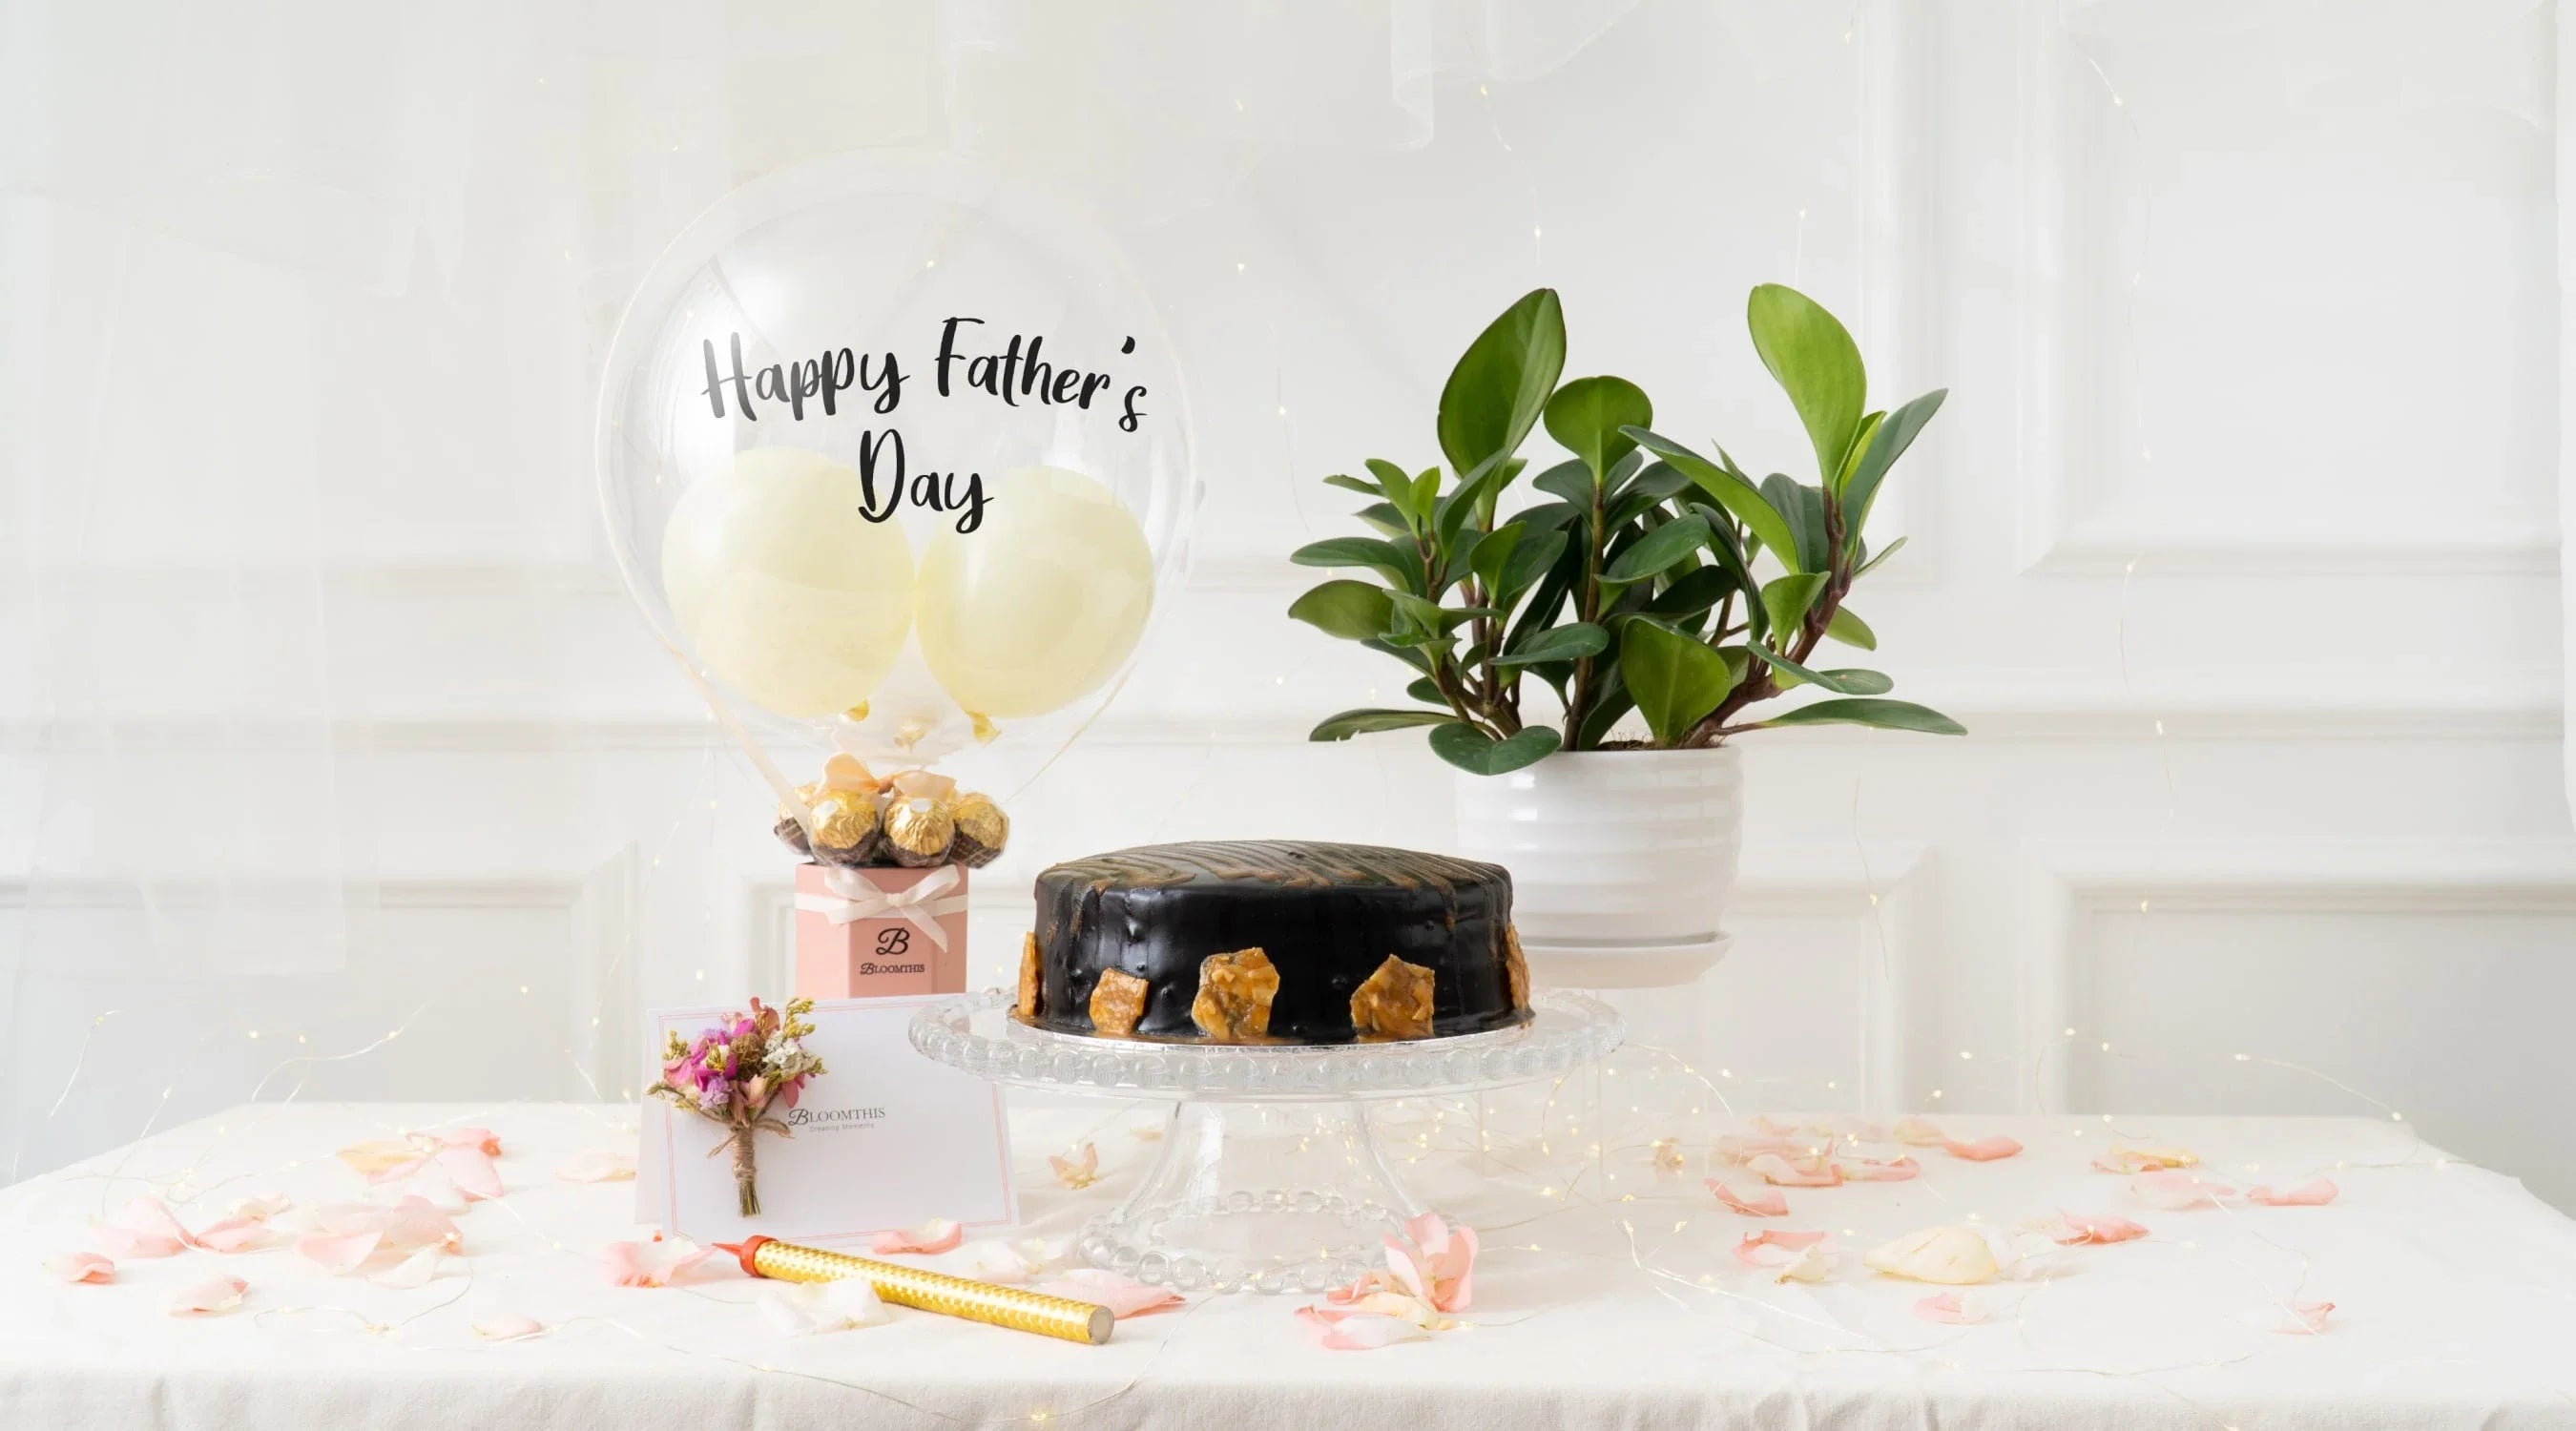 BloomThis Father's Day gifts & presents